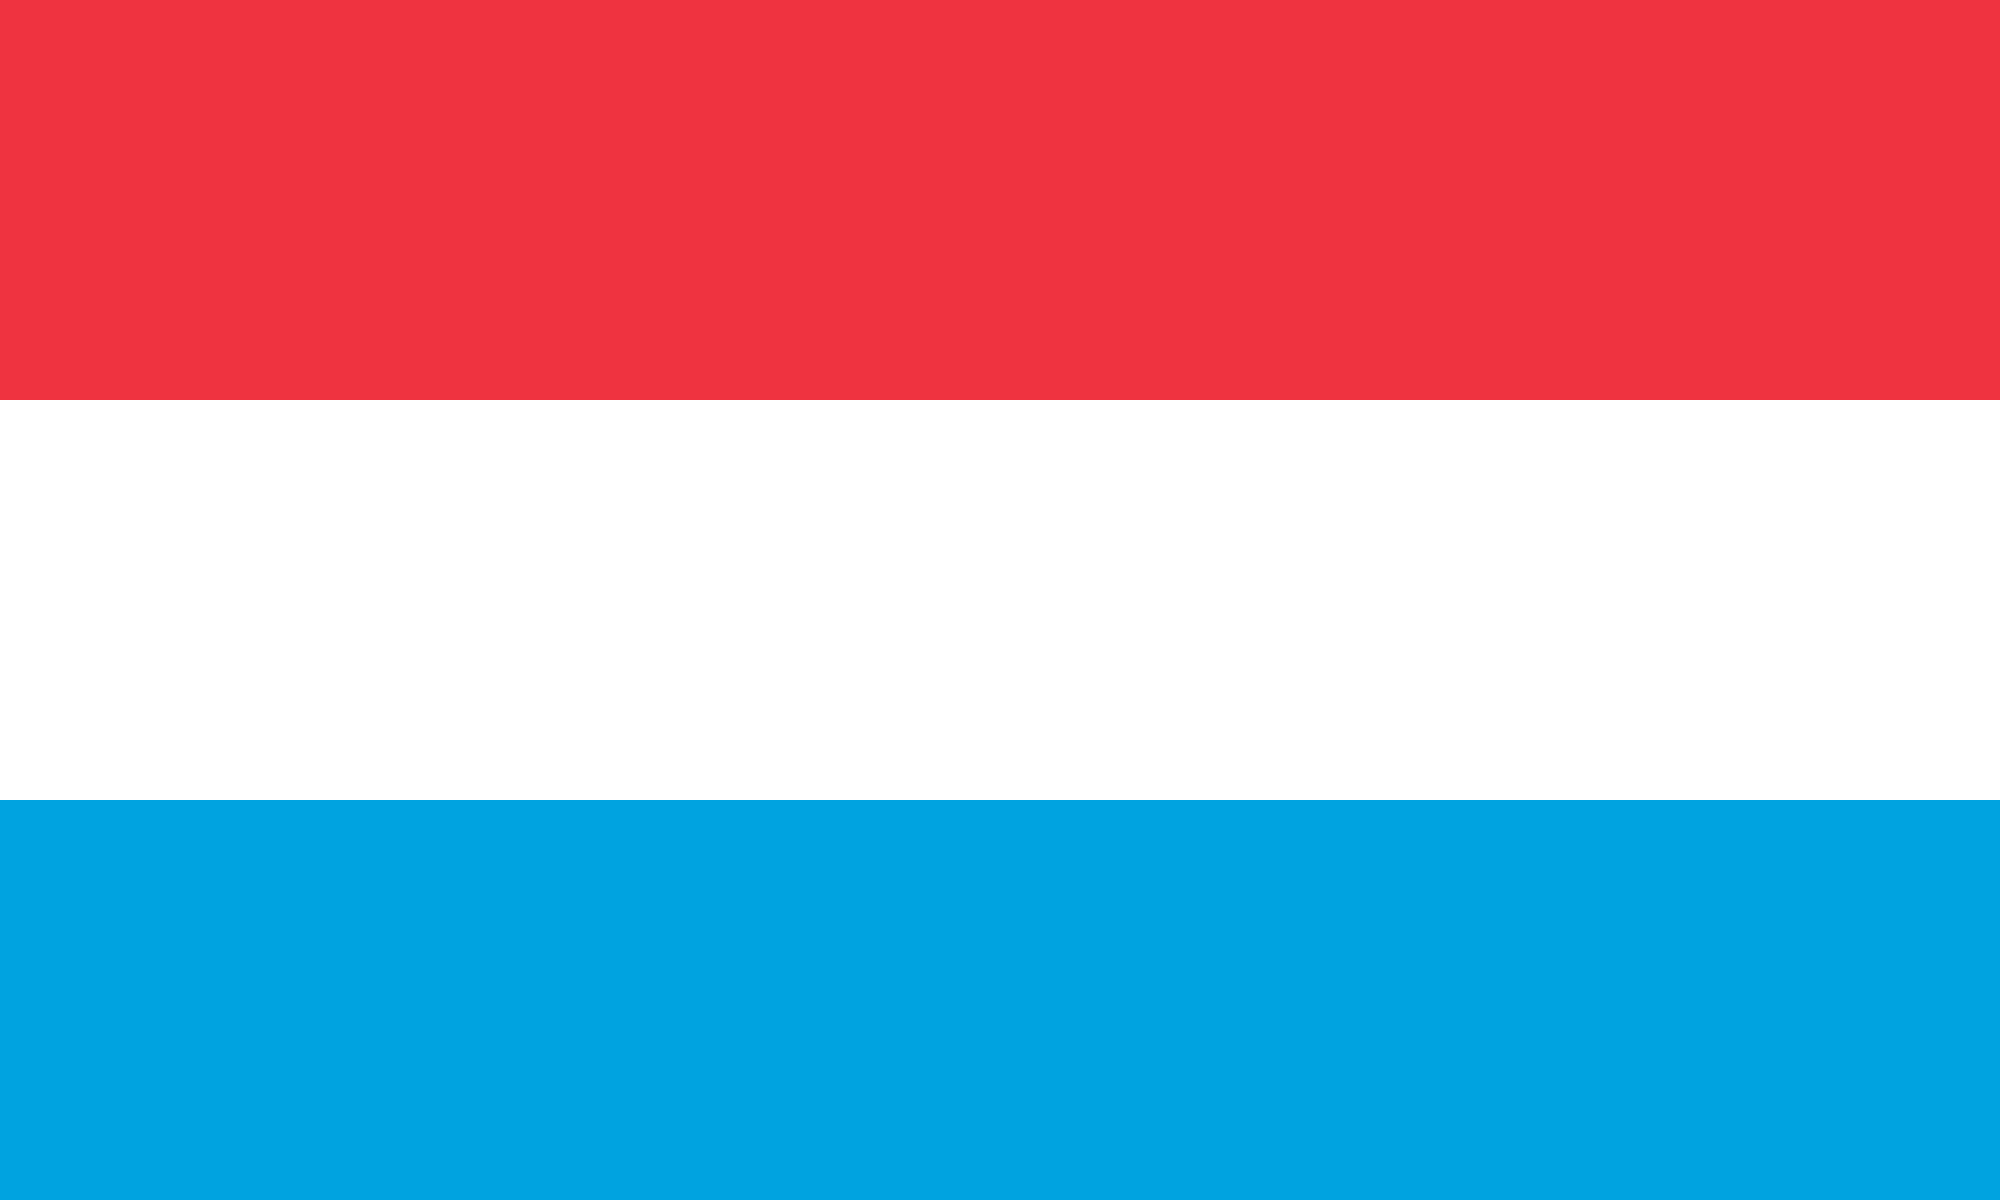 https://upload.wikimedia.org/wikipedia/commons/thumb/d/da/Flag_of_Luxembourg.svg/2000px-Flag_of_Luxembourg.svg.png